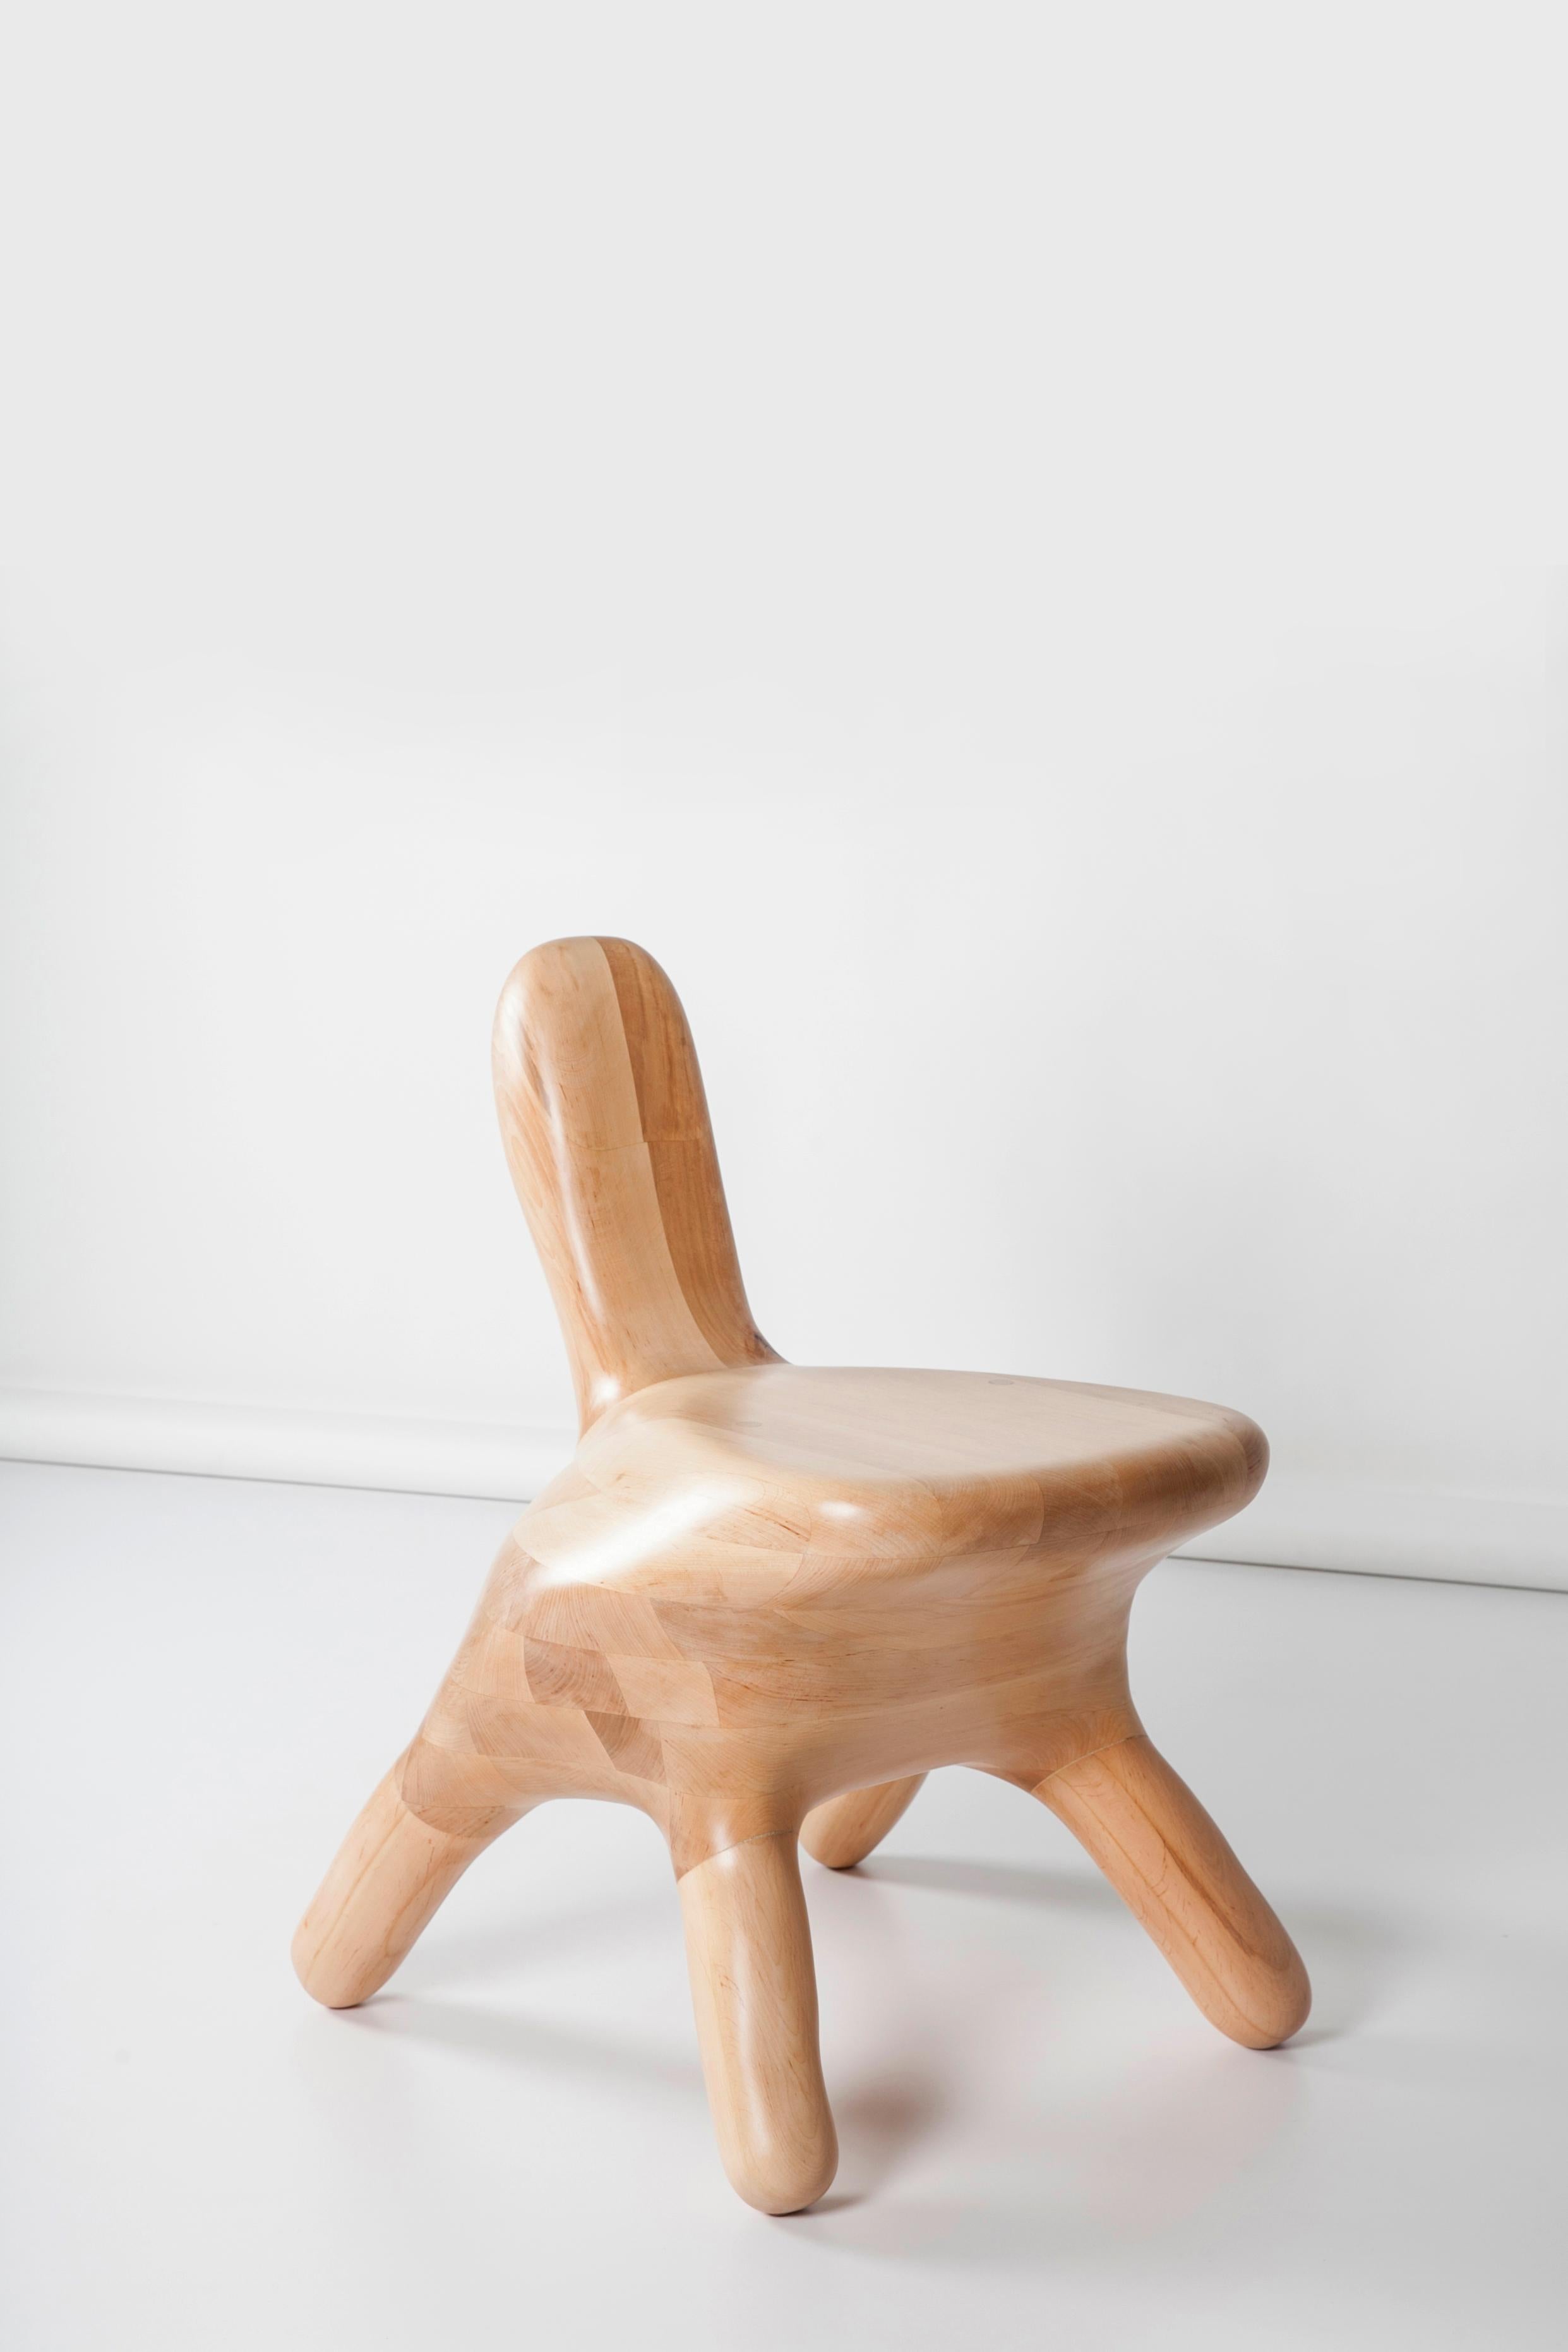 Anna Bera shape N2 chair by Nów
Designed by Anna Bera
Dimensions: D 58 x W 51 x H 72 cm
Materials: hand-carved alder wood

As an artist, woodcarver and carpenter, Anna creates wooden furniture pieces, mainly storages and cabinets crafted by hand in